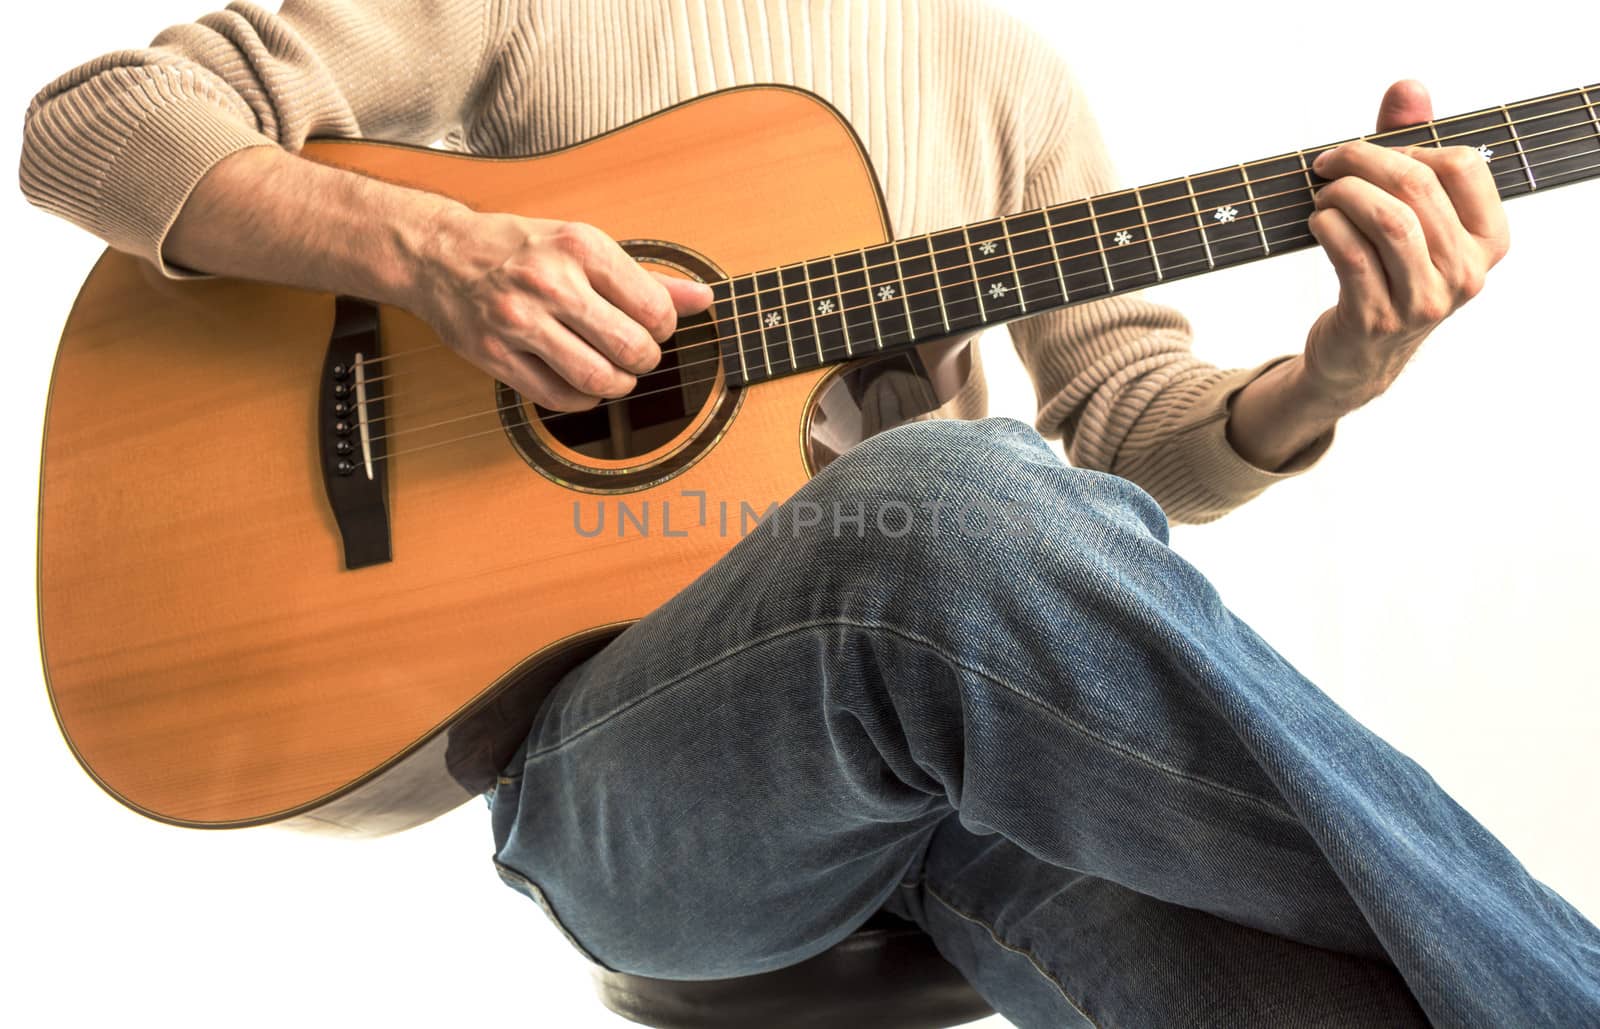 Guitarist with his Acoustic Guitar by snowwhite